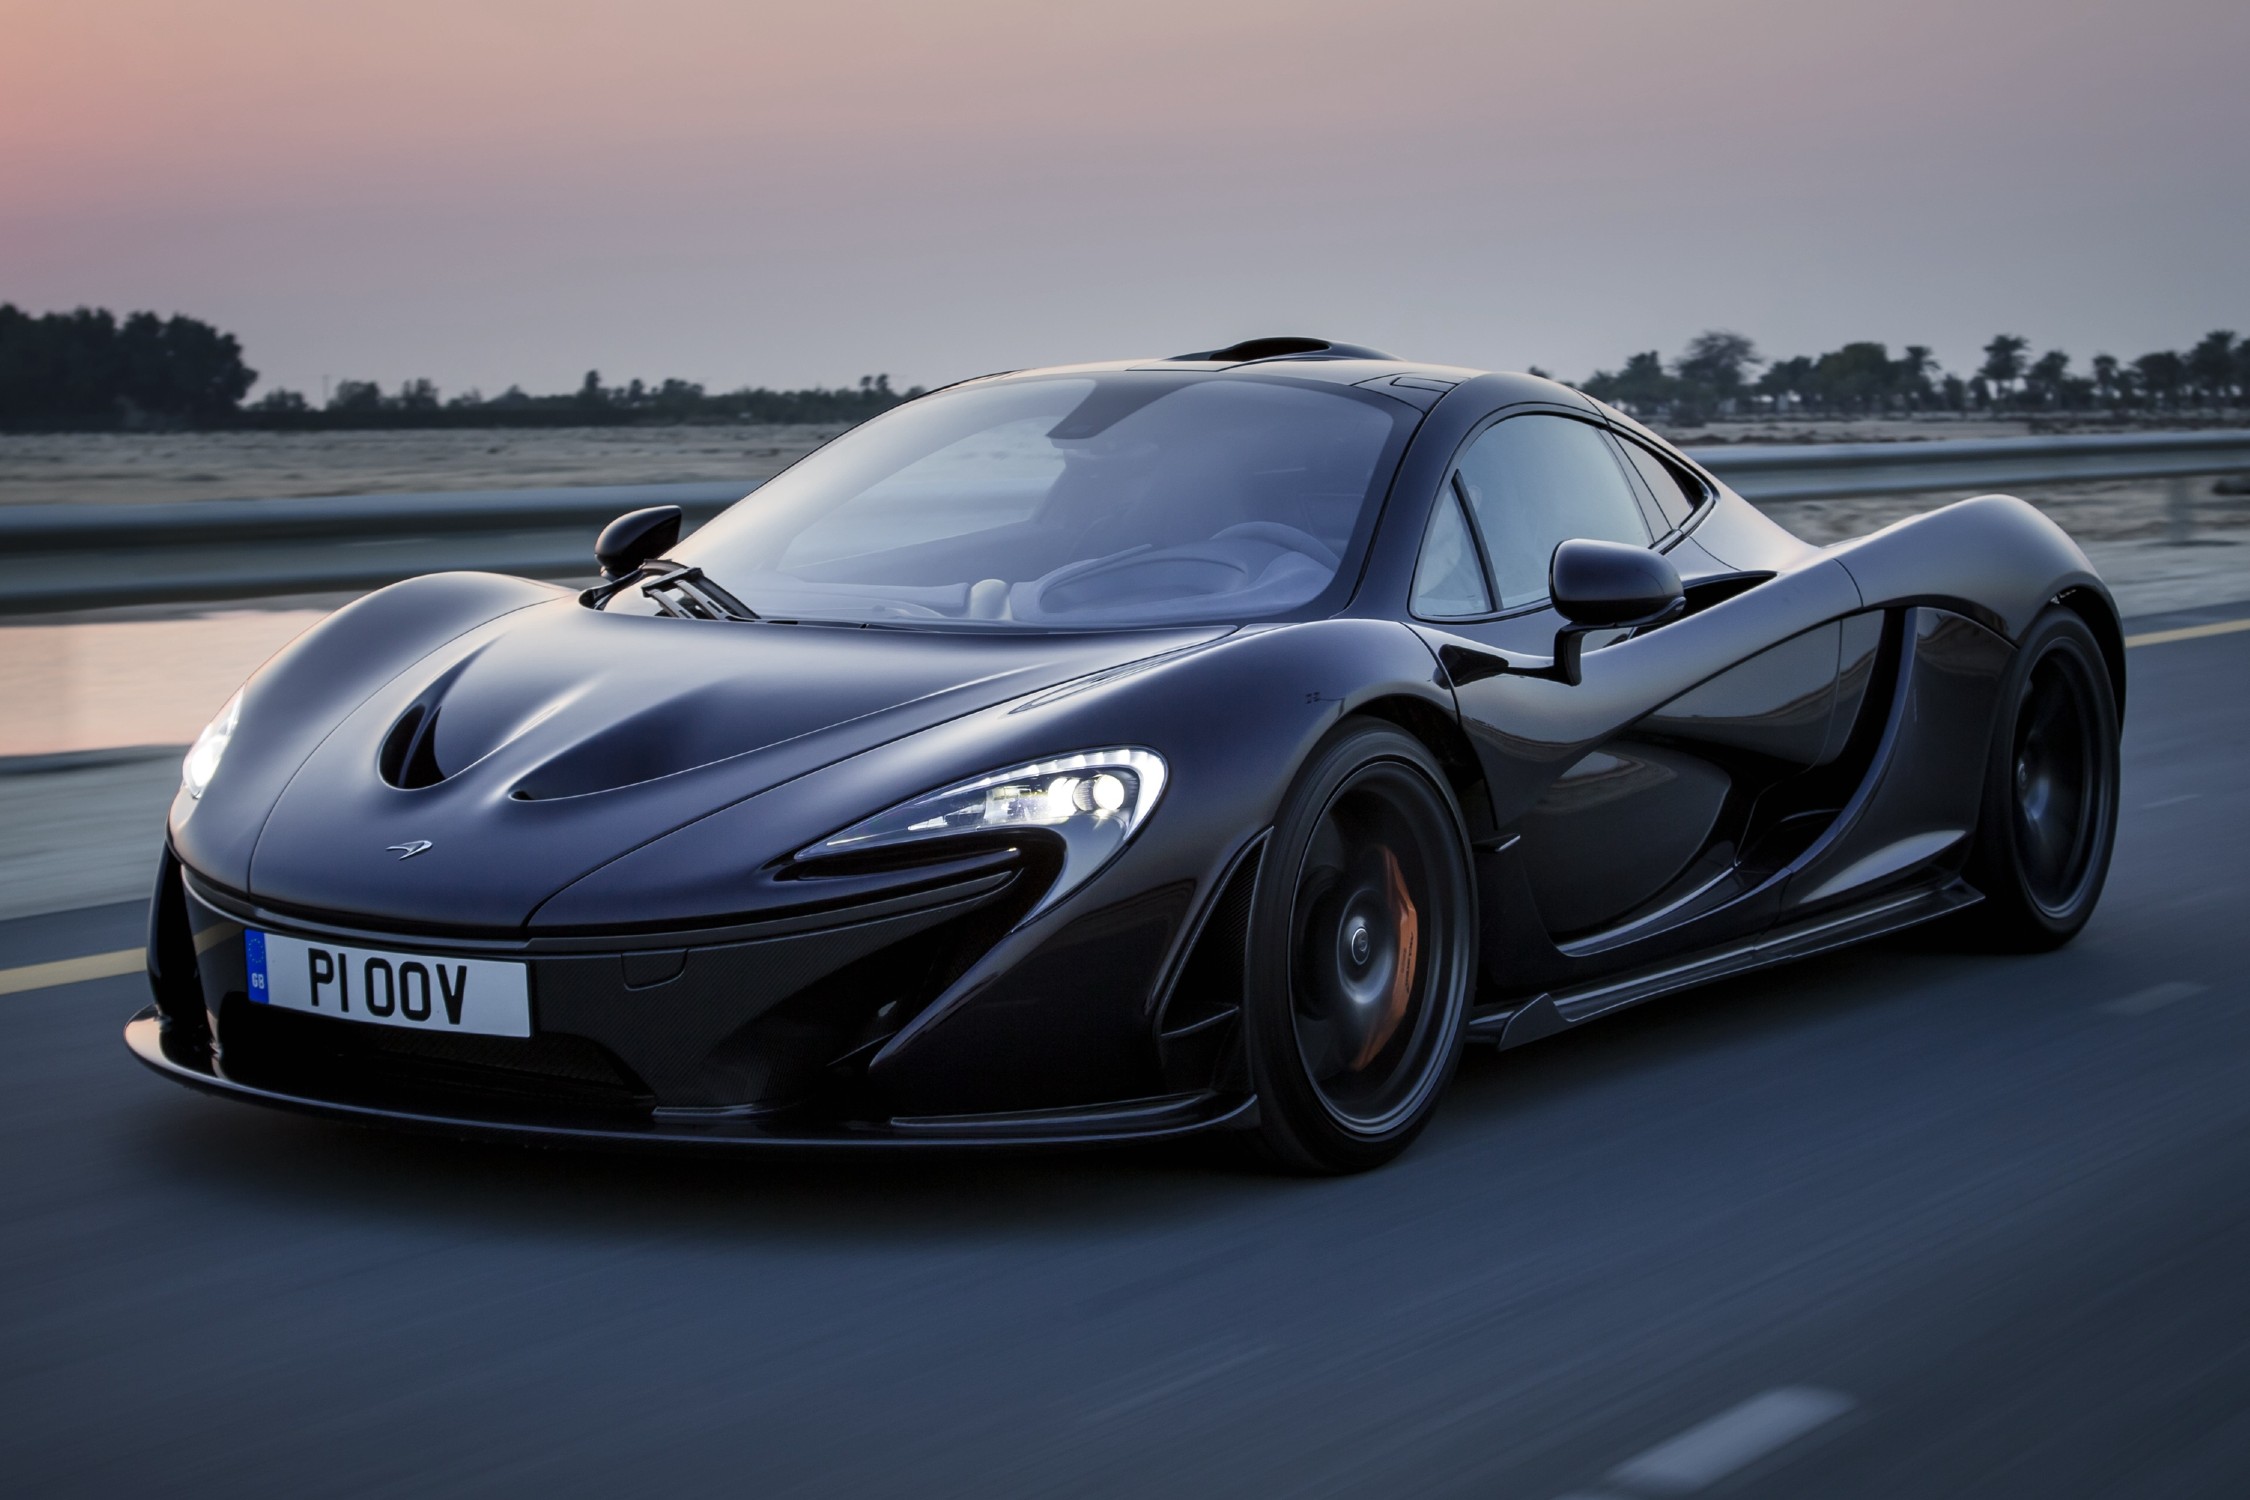 McLaren P1 follow-up, hybrid 750S replacement coming in 2026